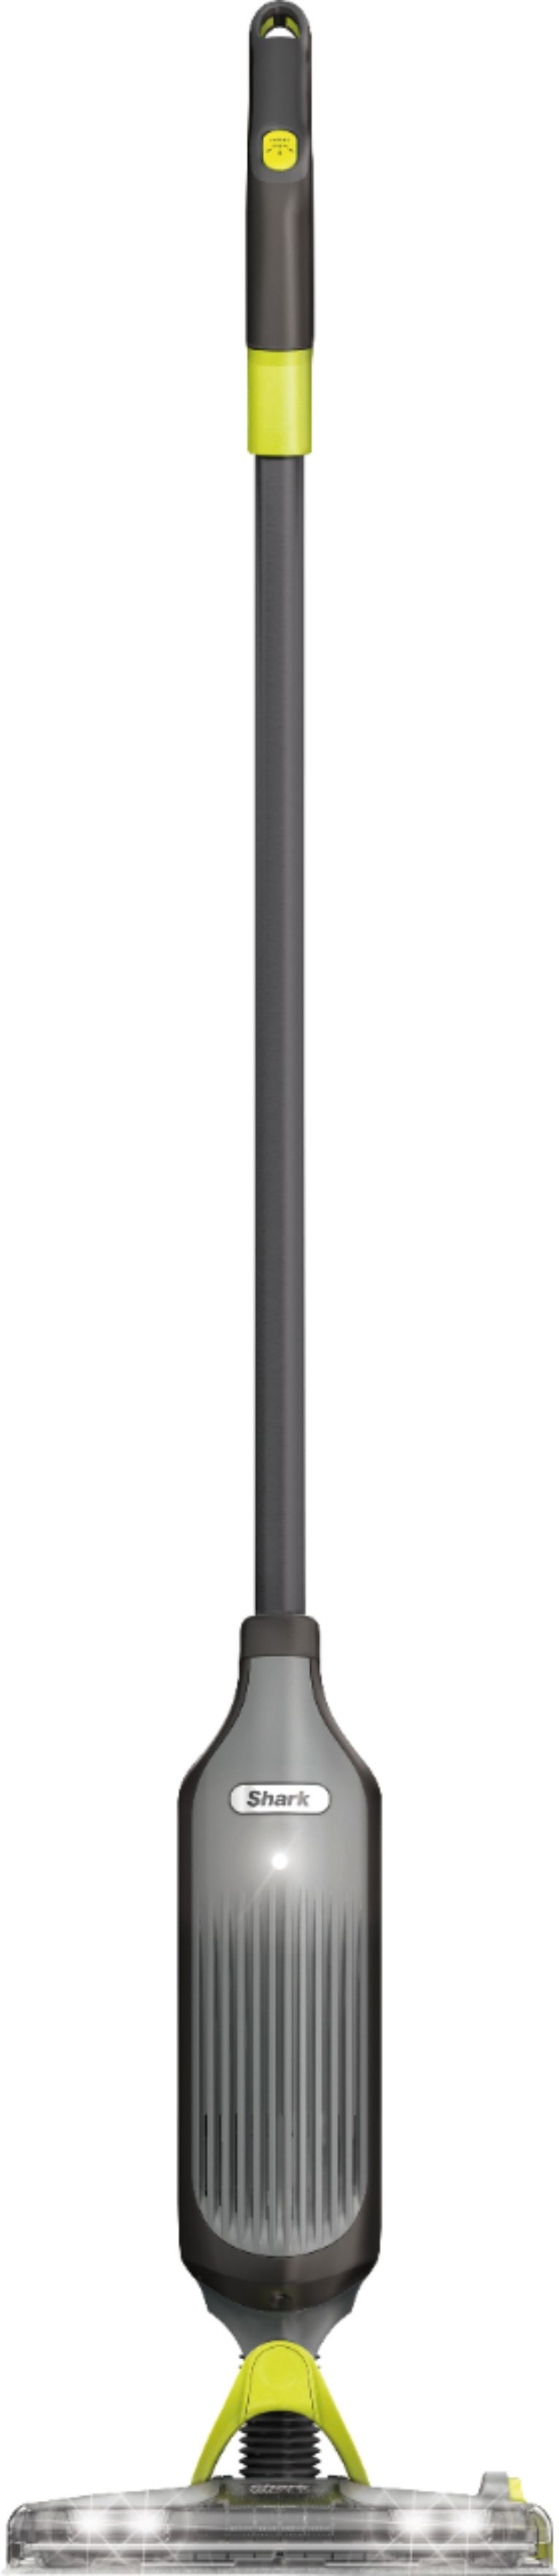 Angle View: Samsung - Jet™ 75 Complete Cordless Stick Vacuum with Long-Lasting Battery - ChroMetal with Teal Silver Filter